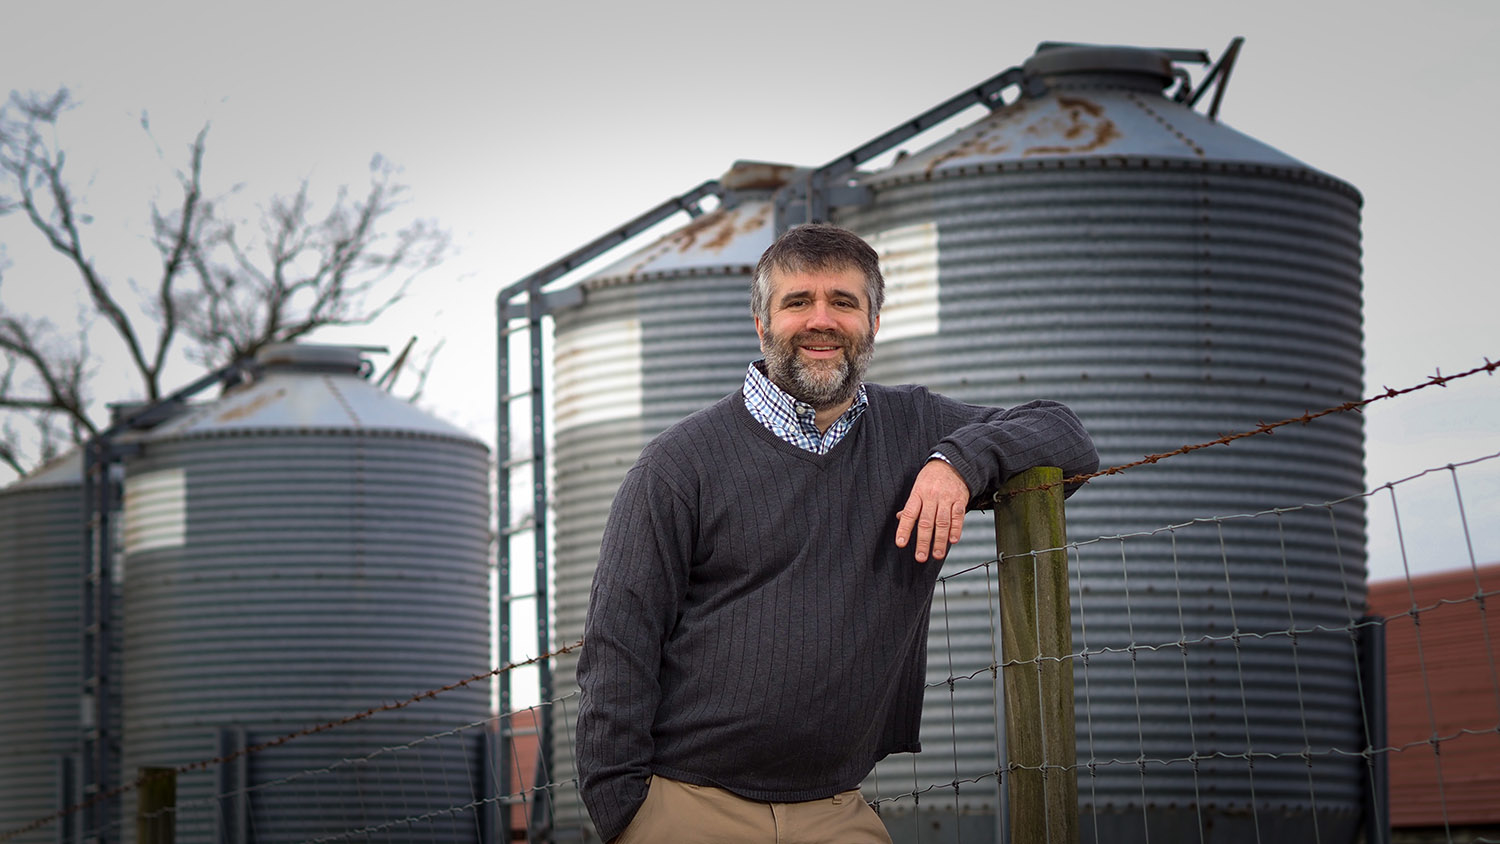 Man leaning against a fence post, with grain bins in the background.